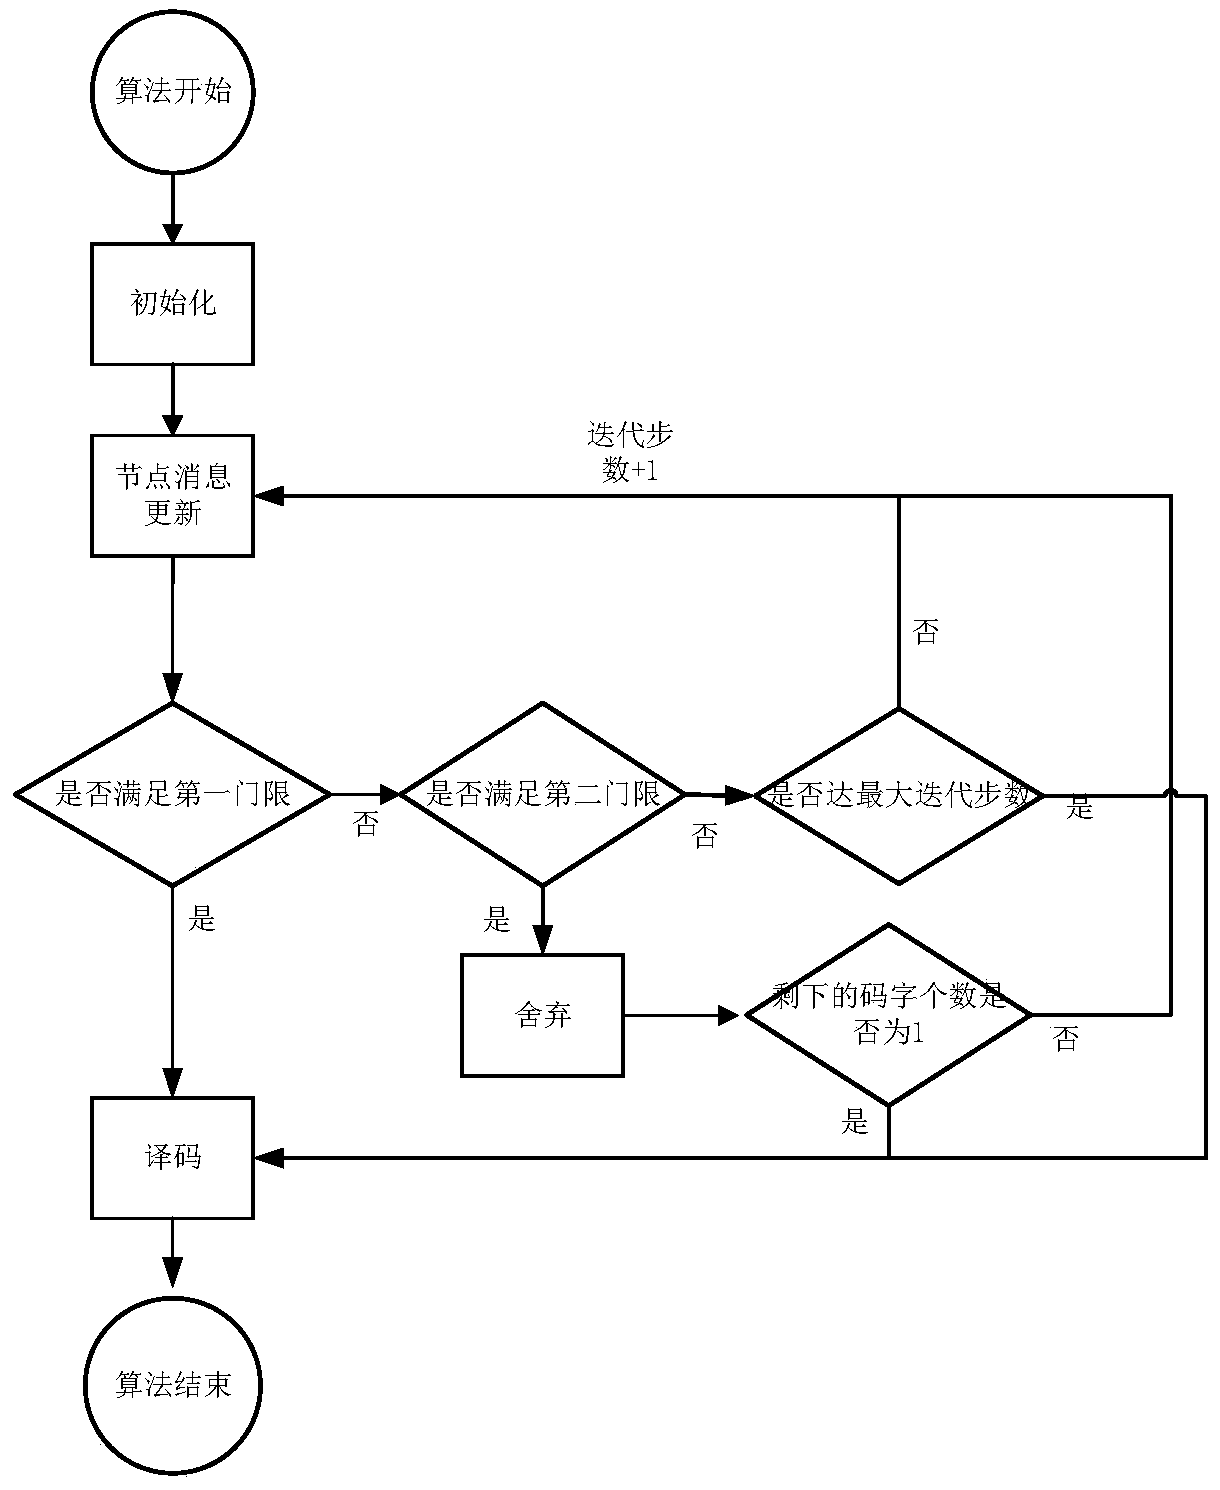 A low-complexity mpa algorithm based on threshold